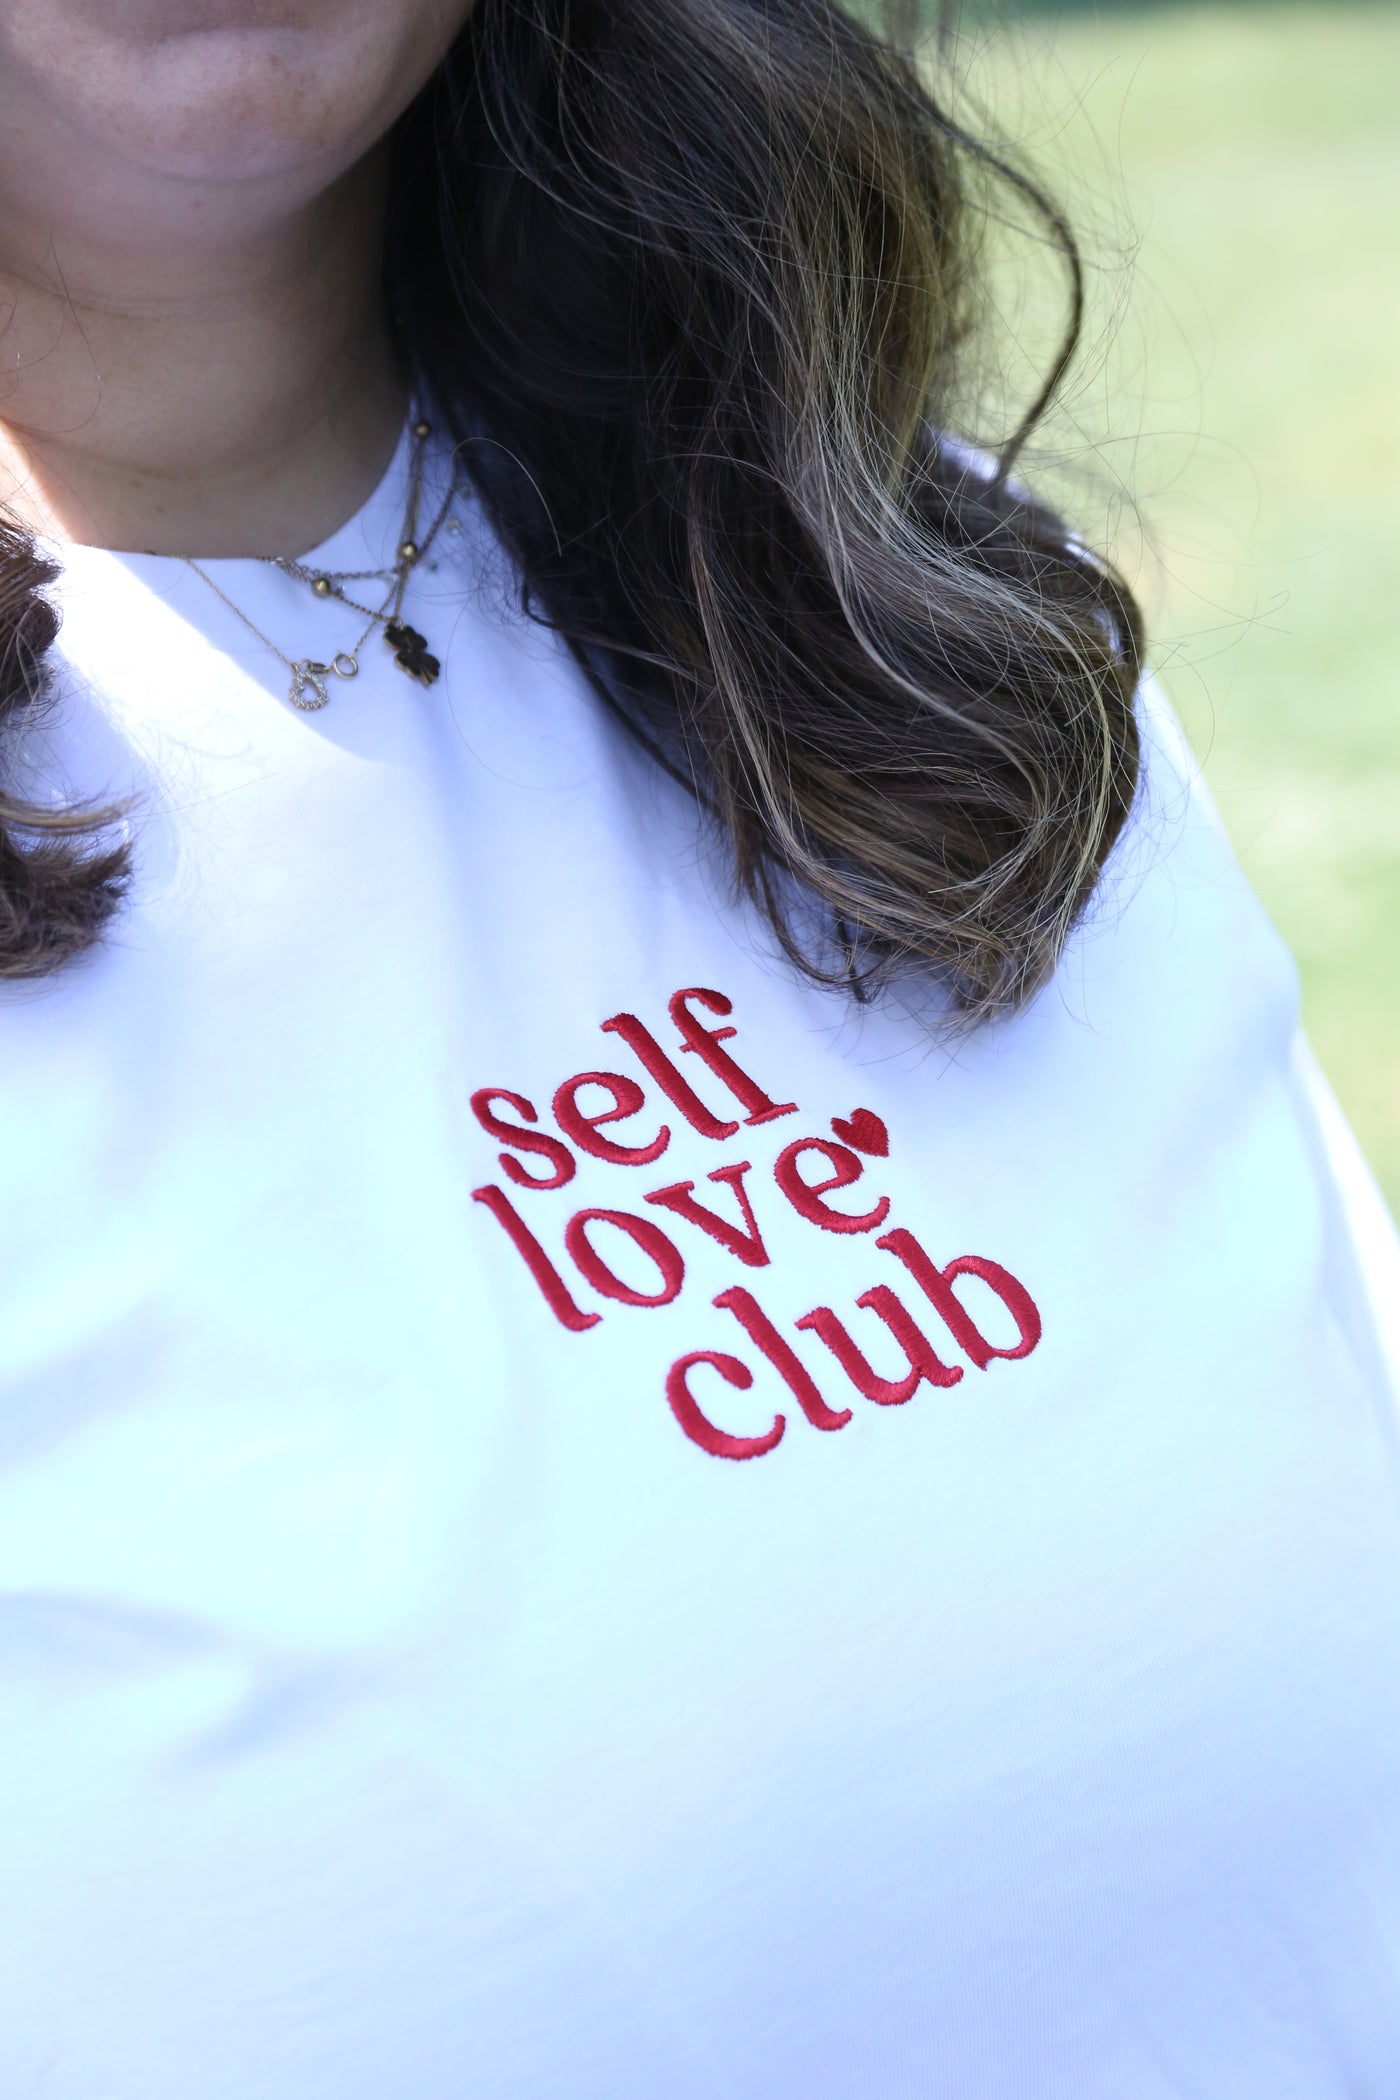 SELF LOVE CLUB(YOU ARE MORE THAN ENOUGH) T-SHIRT - Bold&Goodly